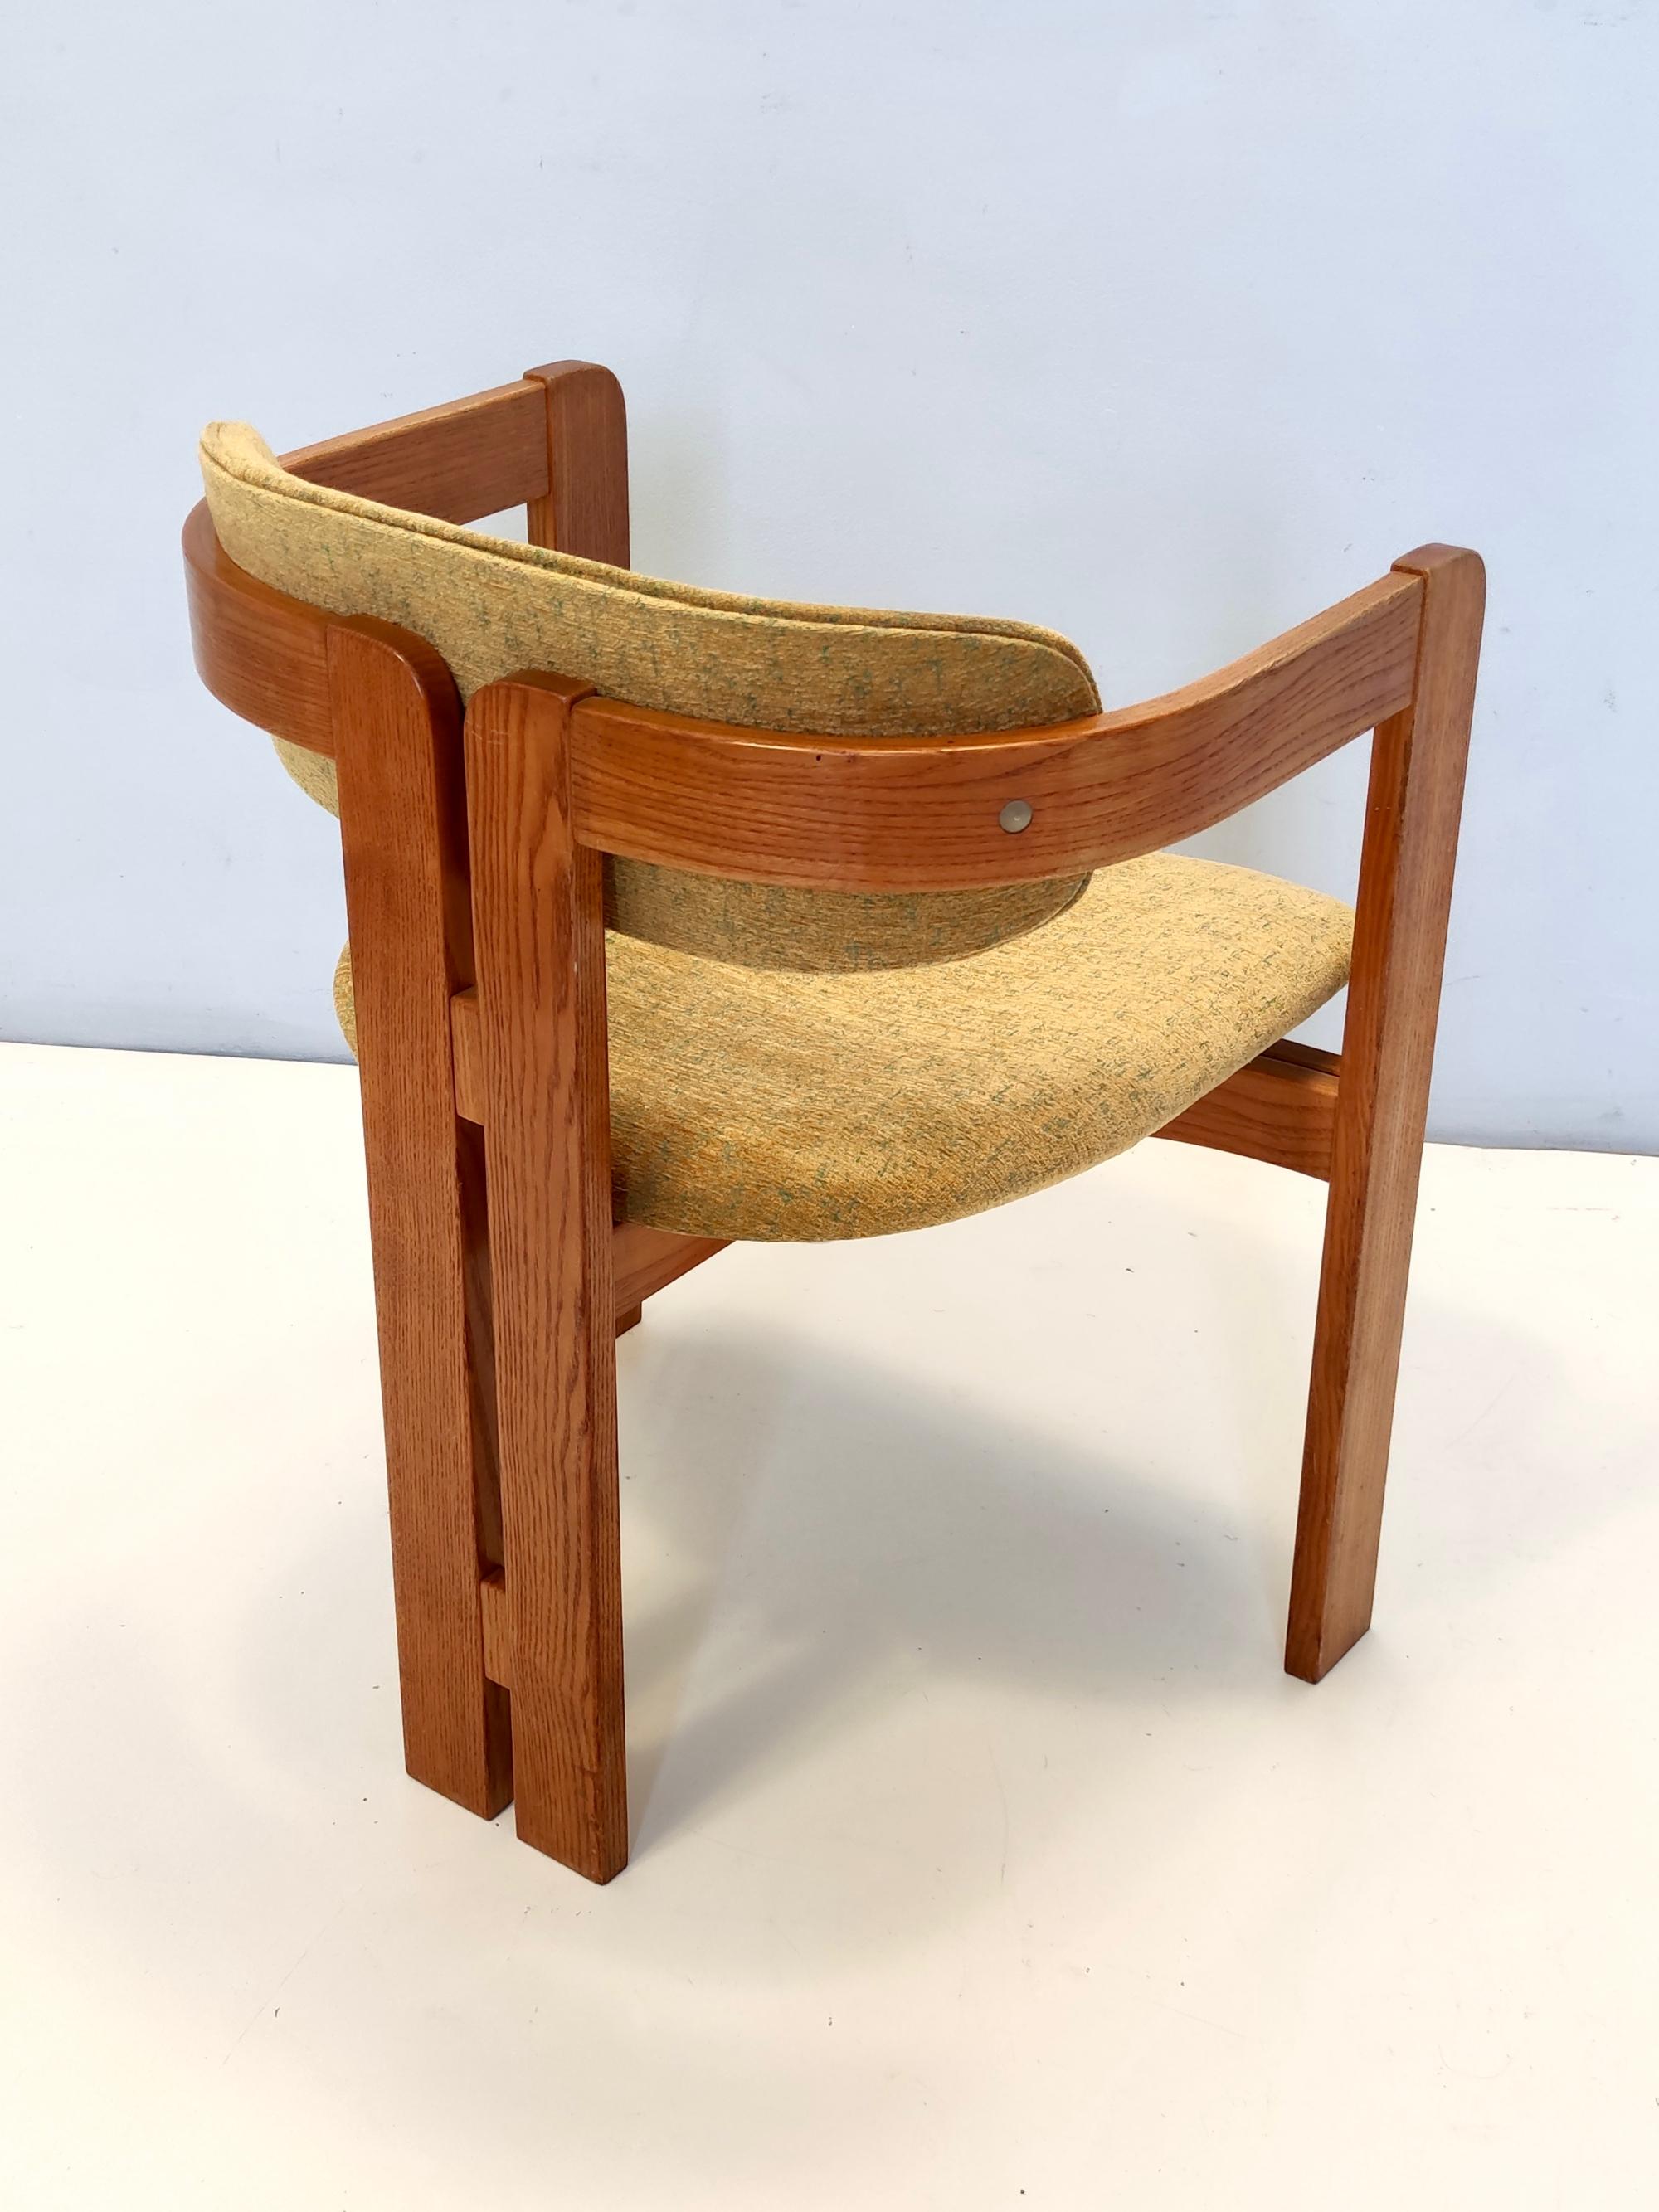 Mid-20th Century Pigreco Chair in the style of Tobia Scarpa for Gavina with Yellow Upholstery